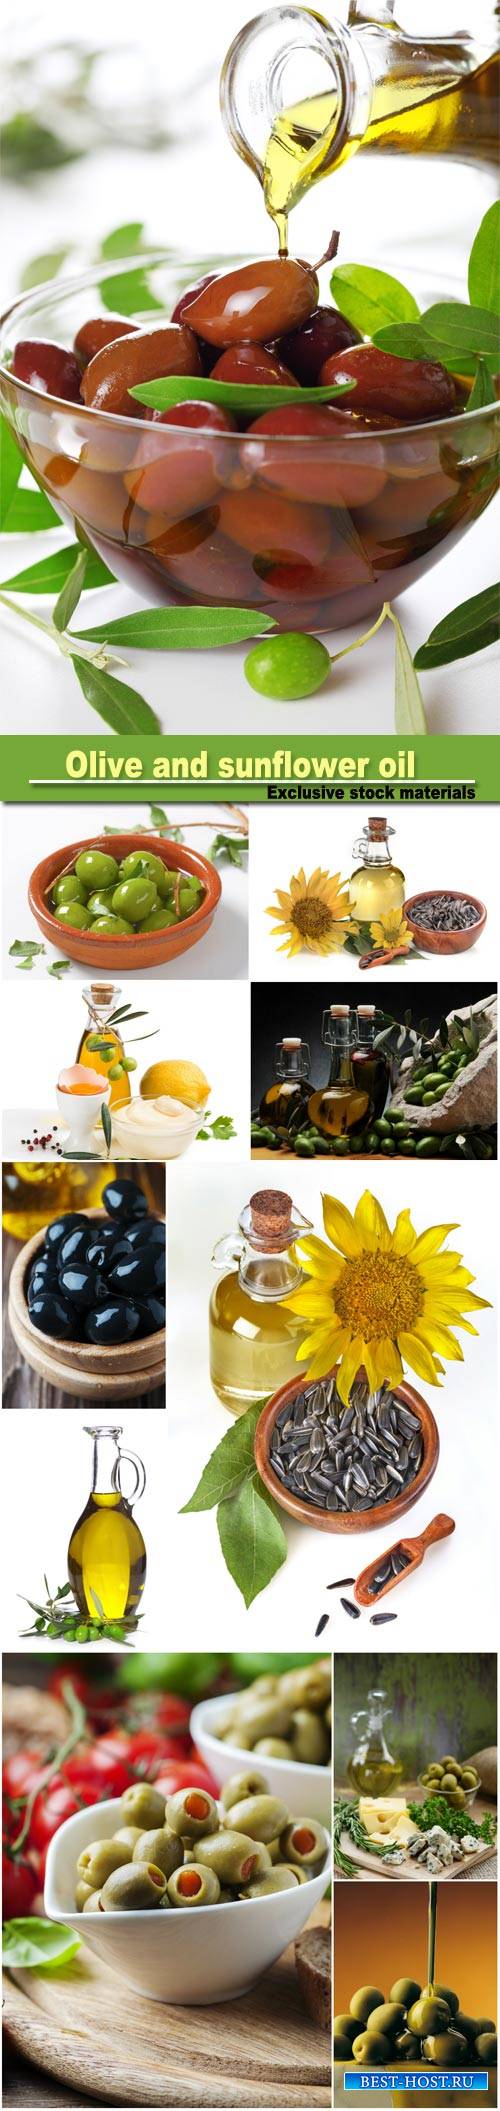 Olive and sunflower oil